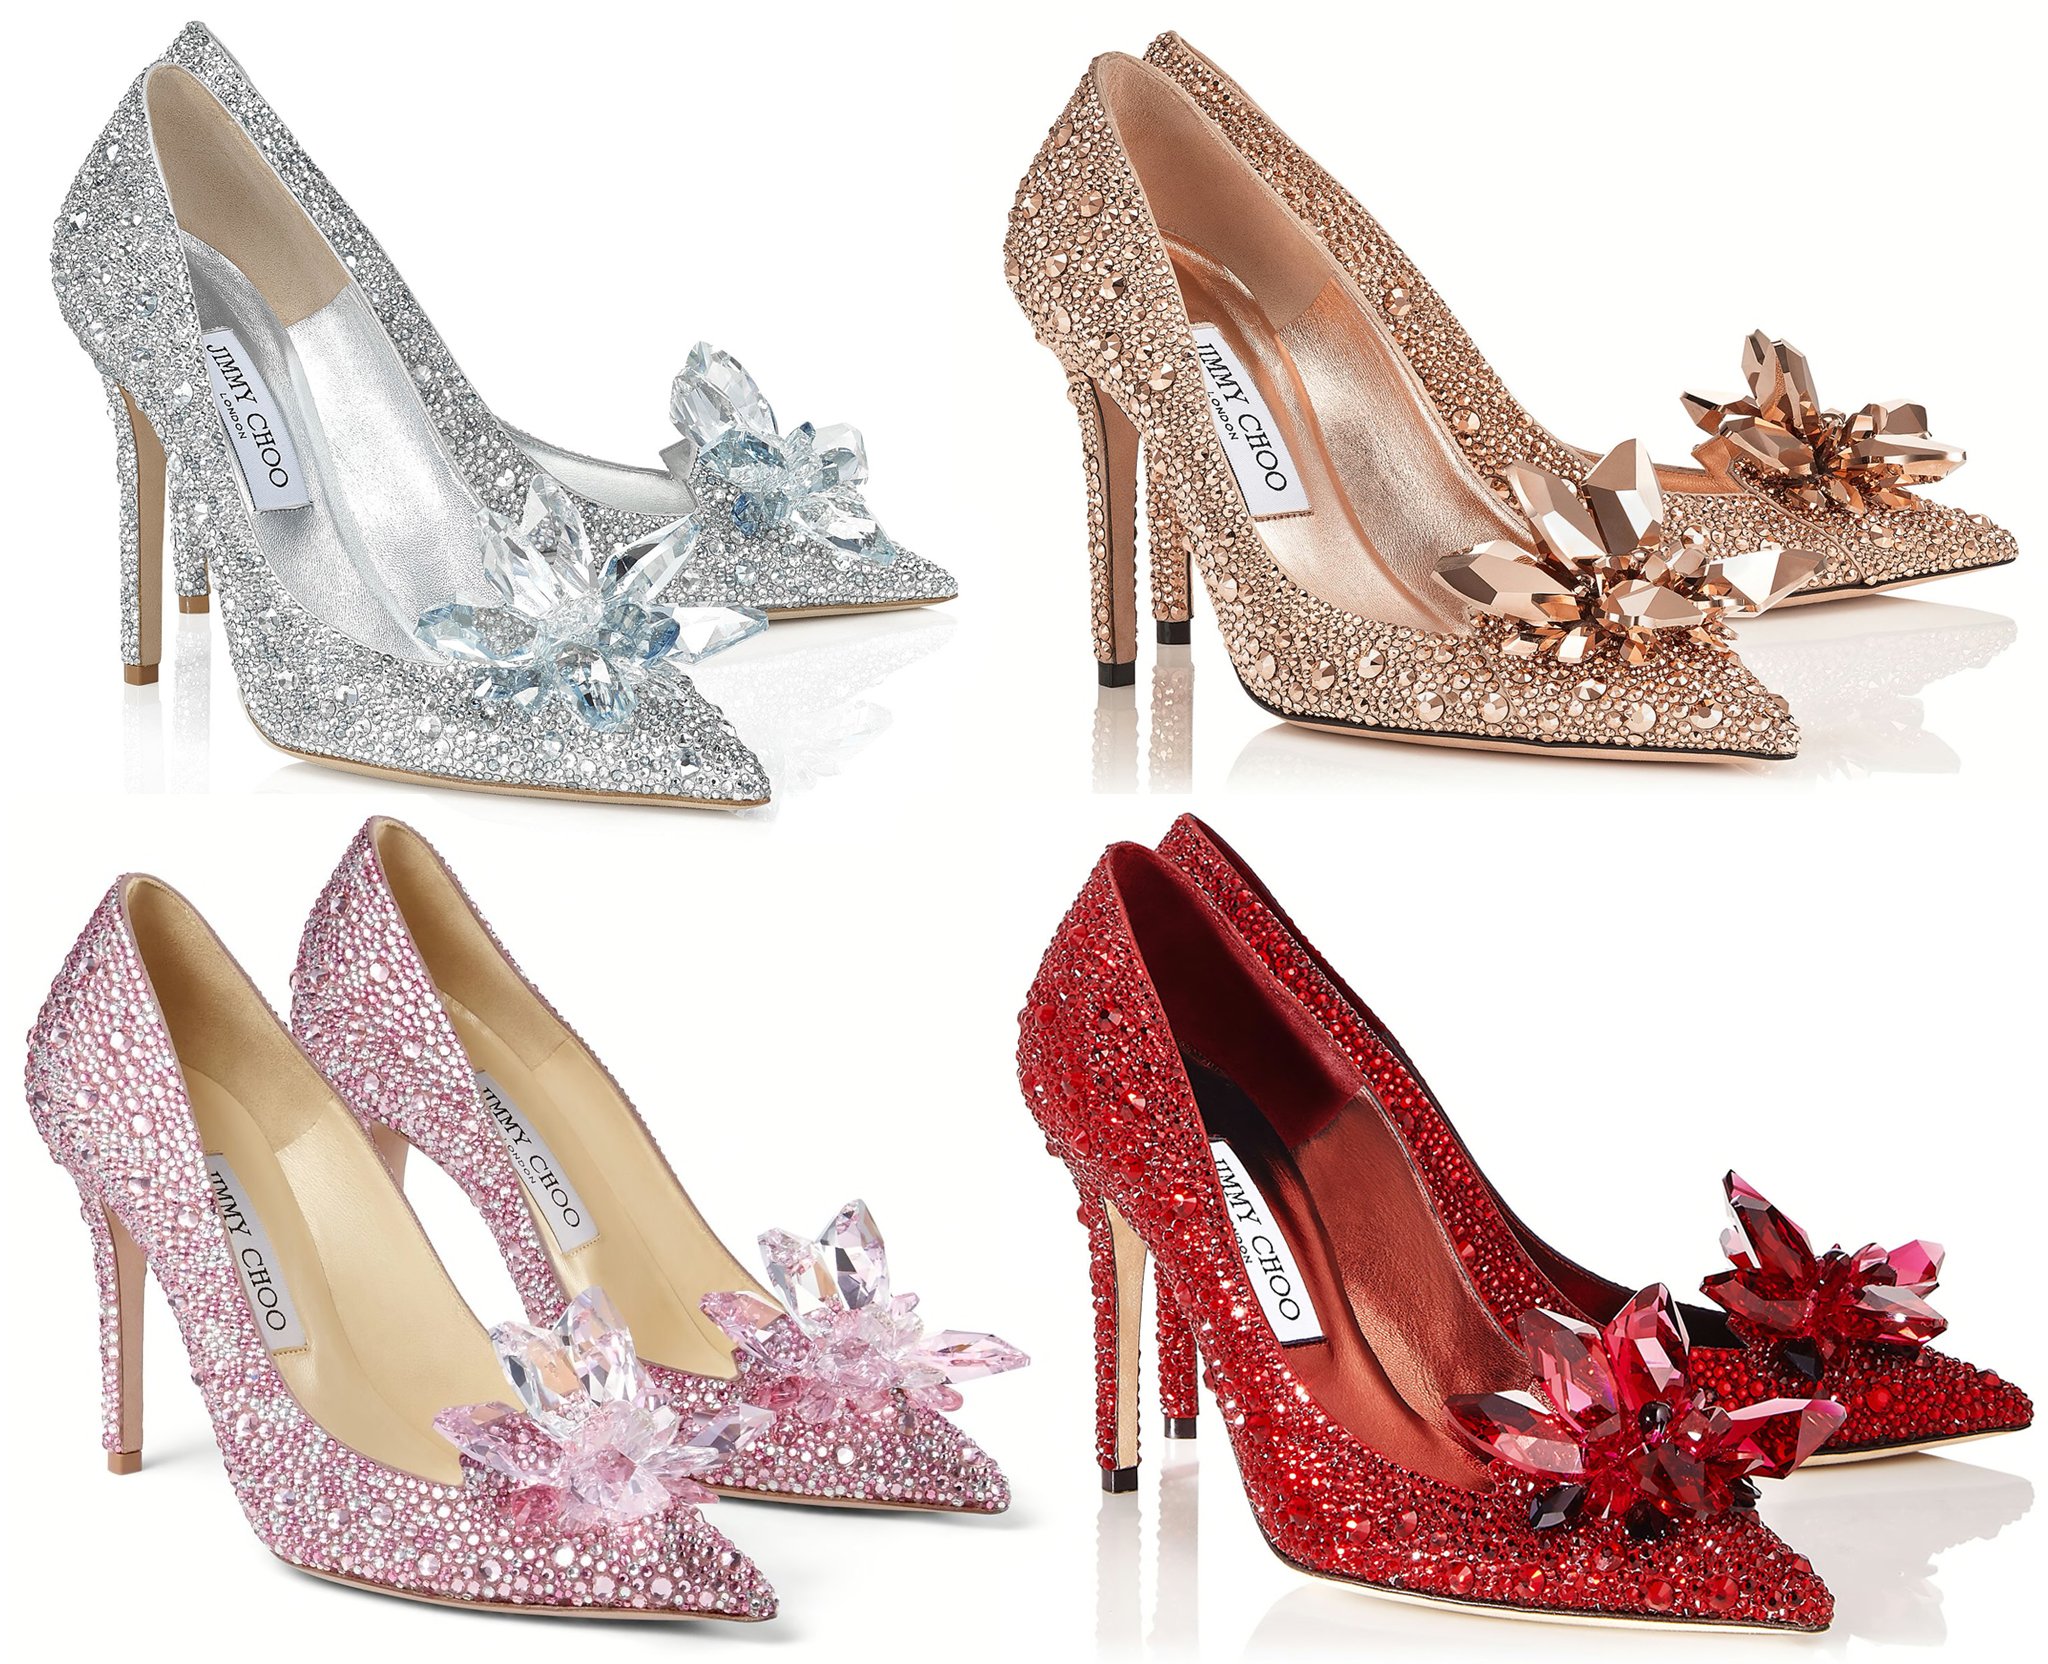 The crystal-covered Jimmy Choo Avril is one of the brand's most expensive styles, retailing for $4,700